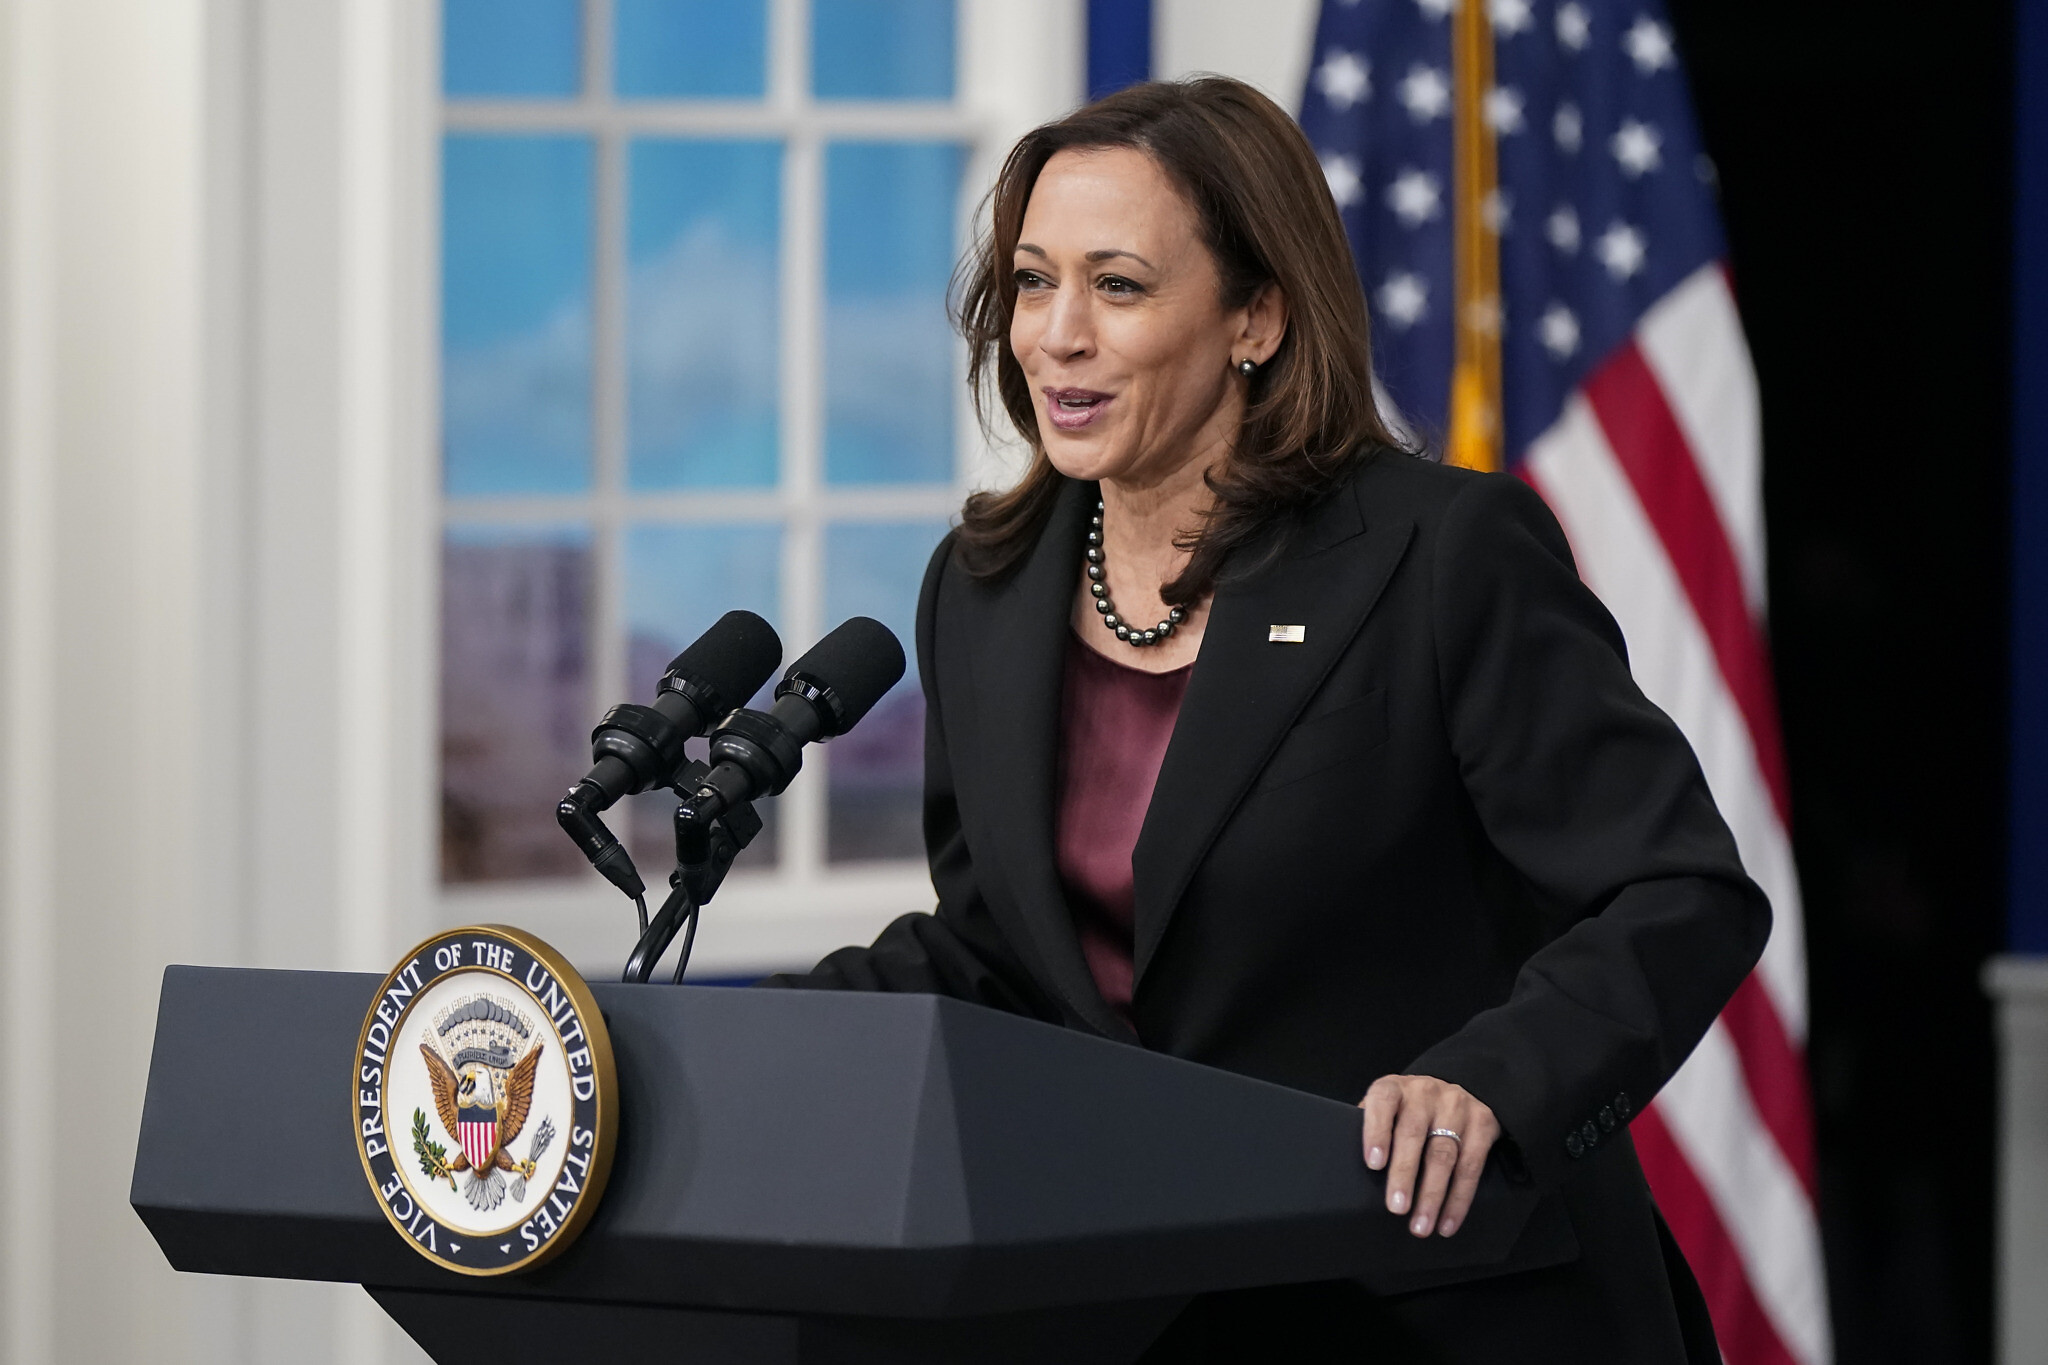 Making history, Harris briefly becomes first US woman to hold ...